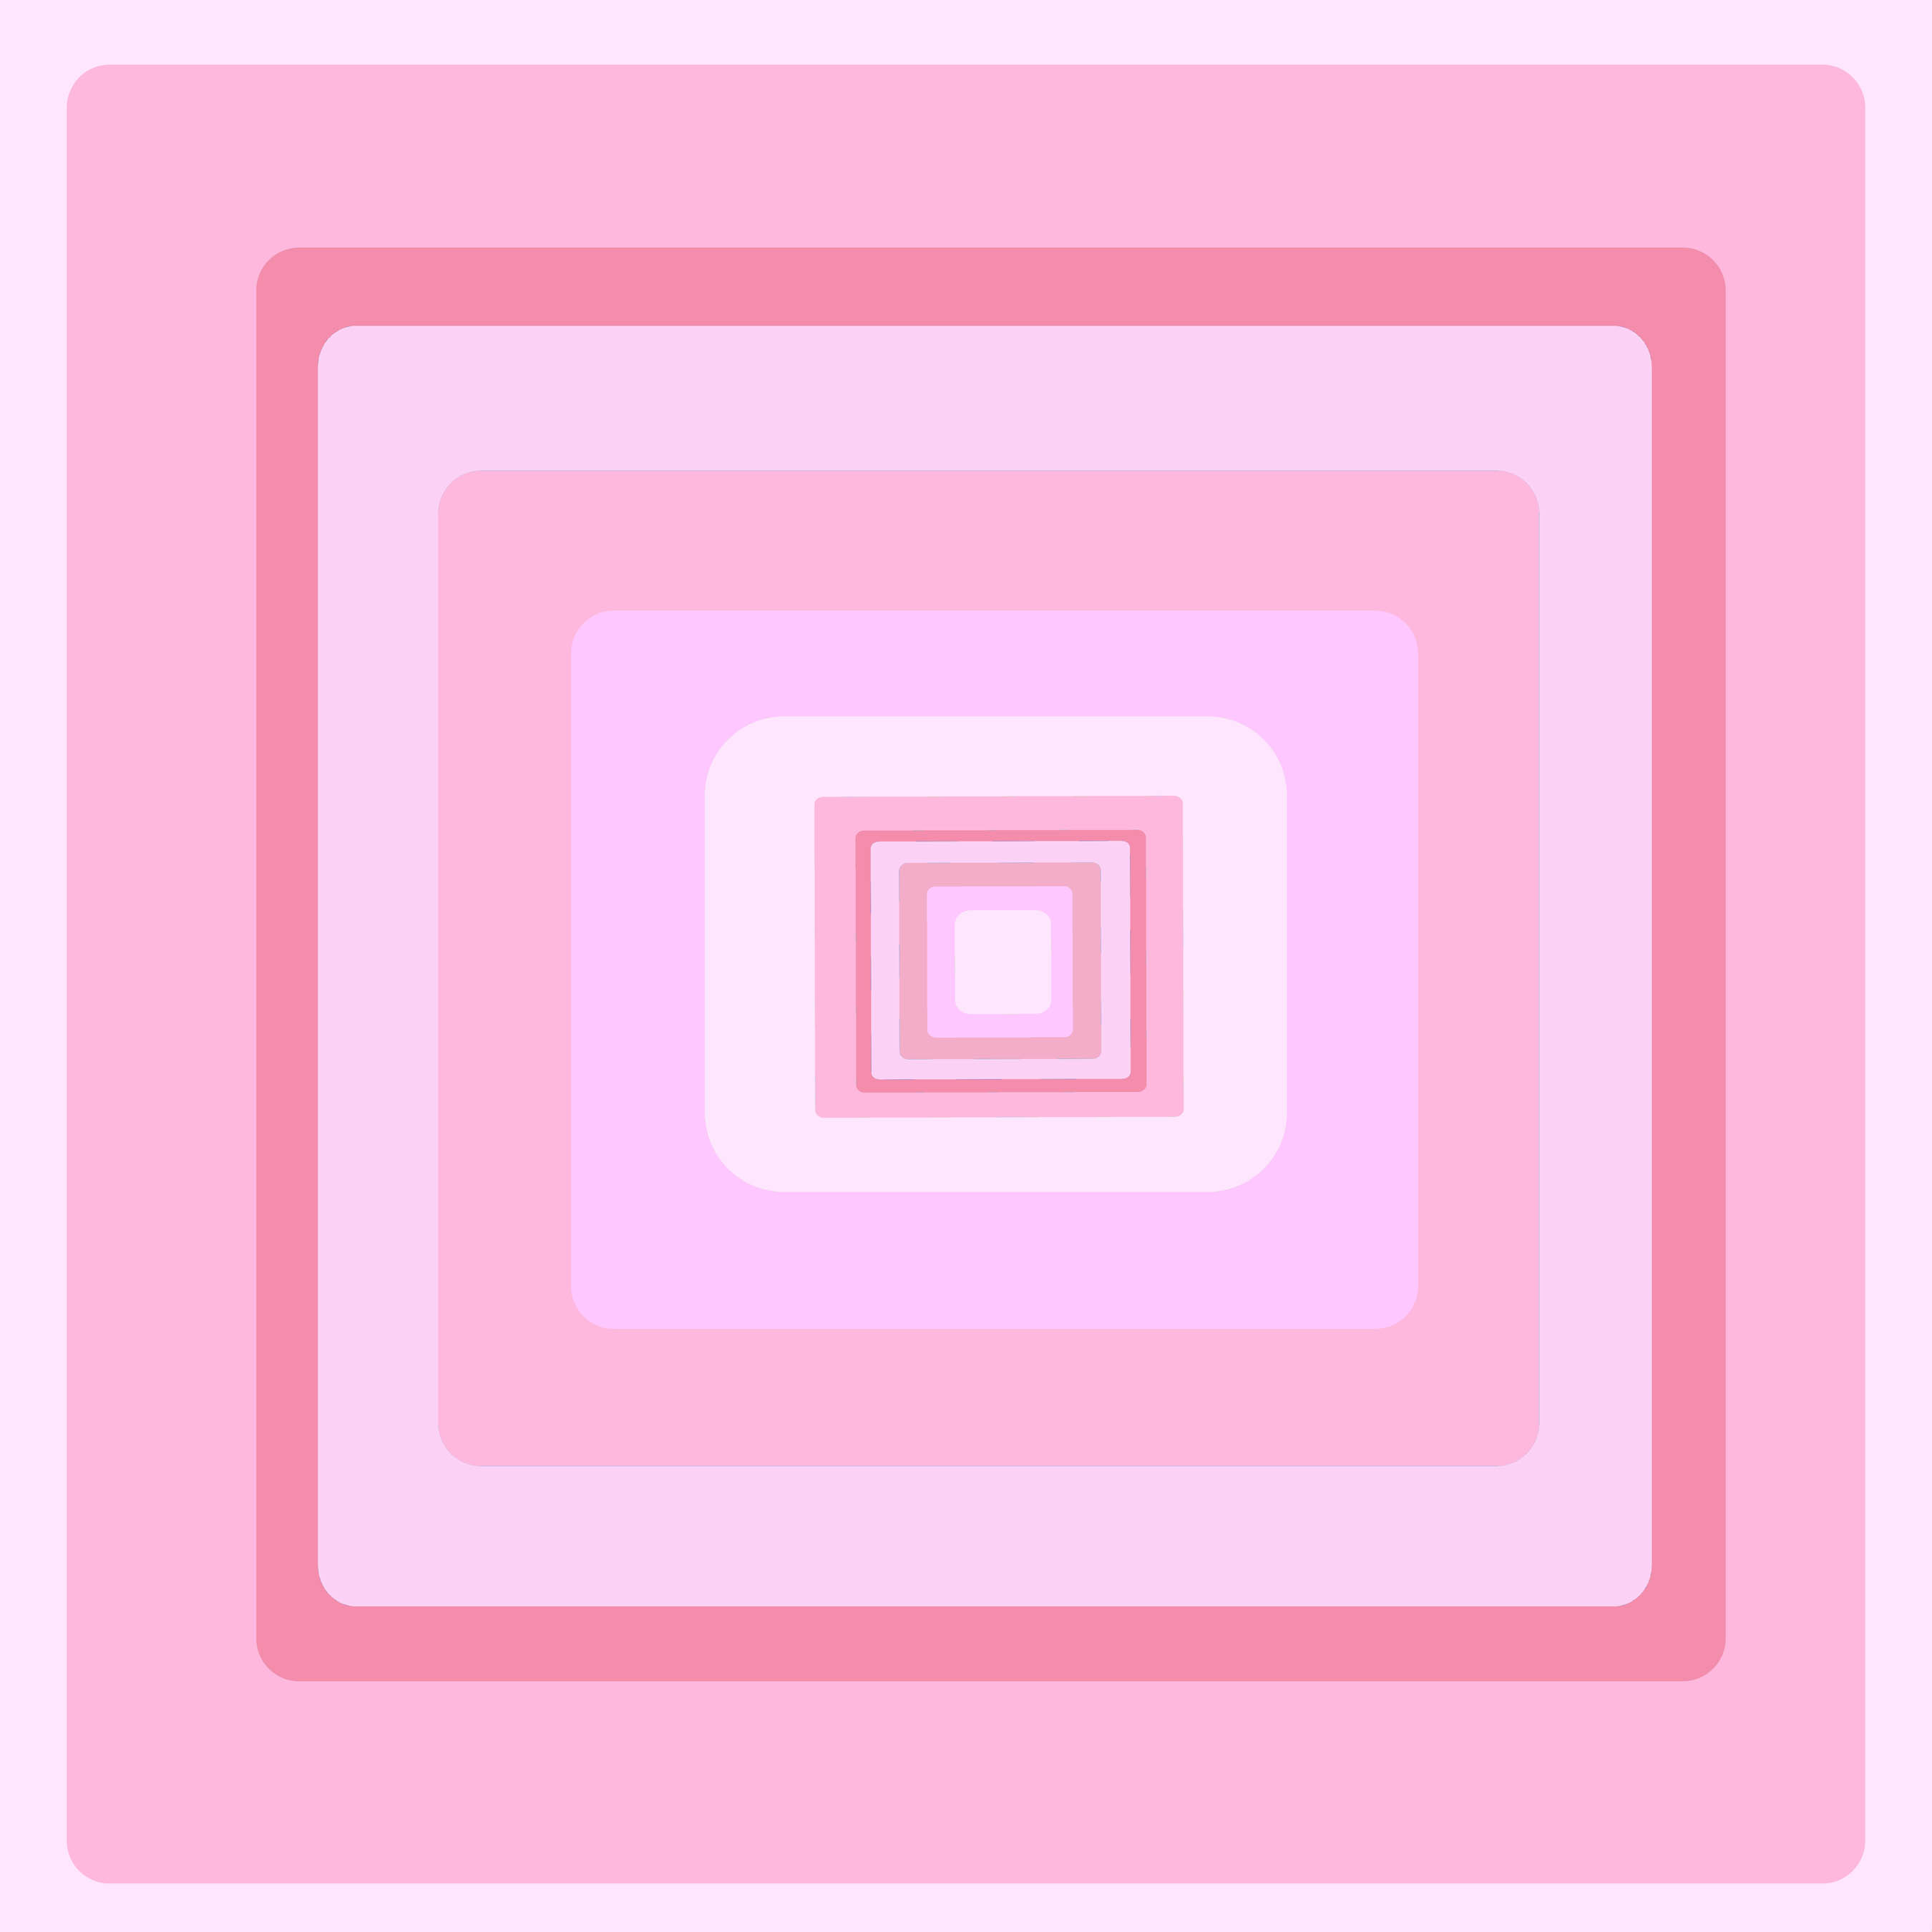 art every day number 584 / pattern & colour / pink squares